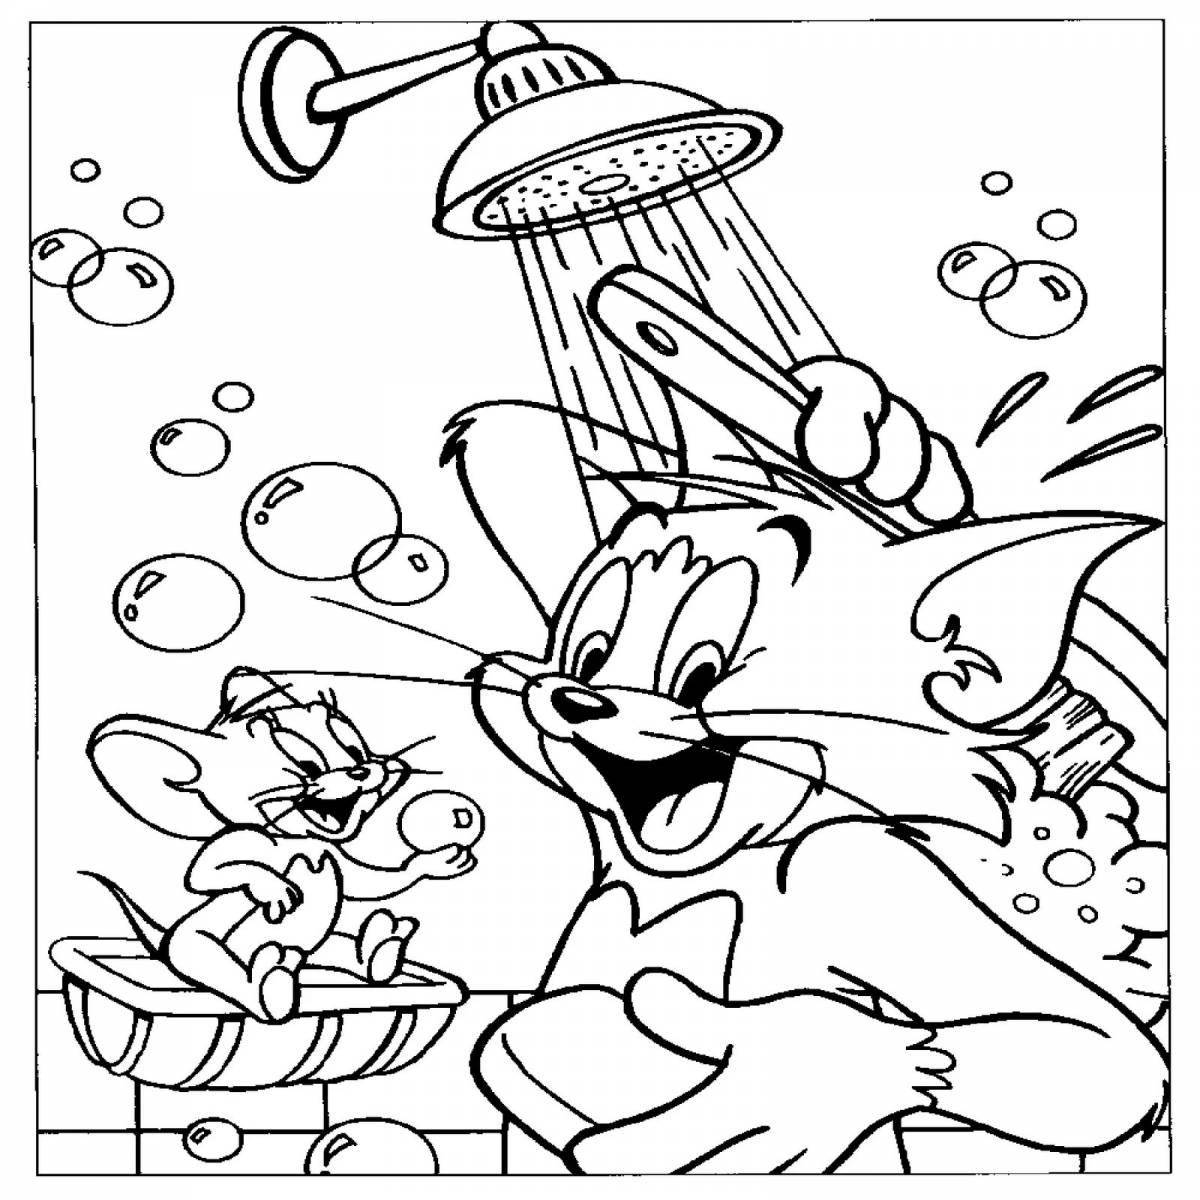 Exquisite tom and jerry coloring book